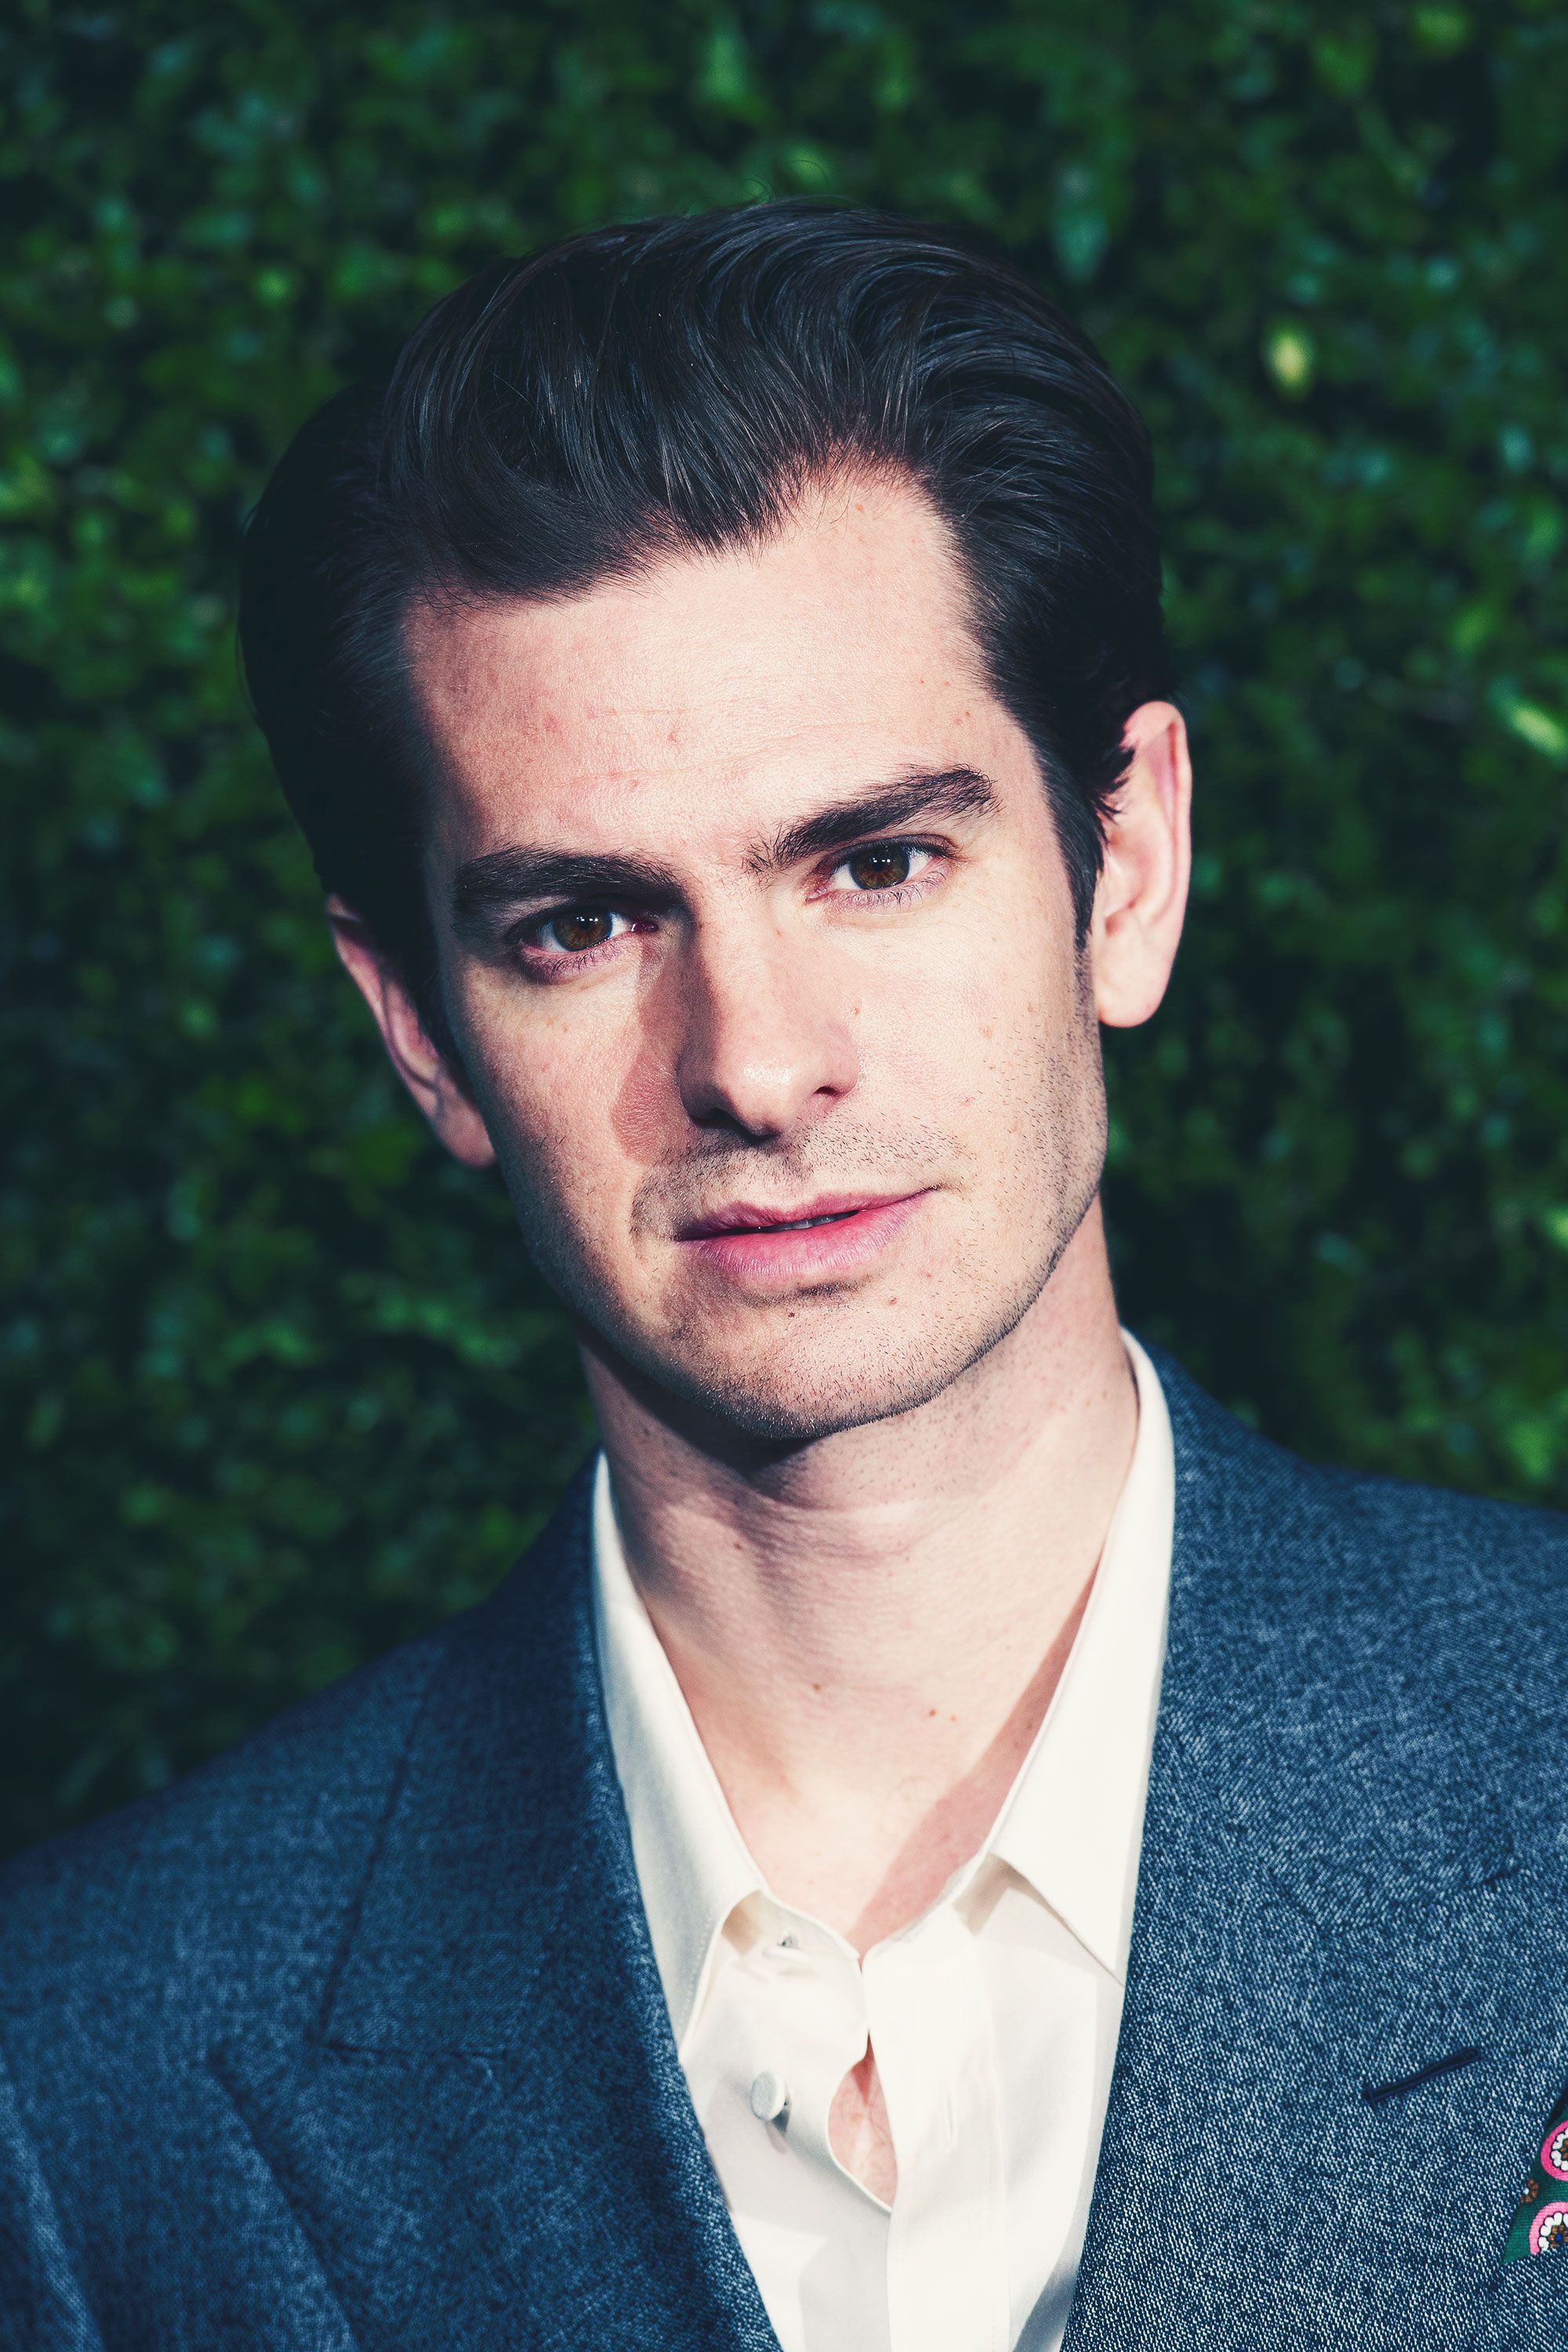 Andrew Garfield Shares Deep Thoughts on Love, Families